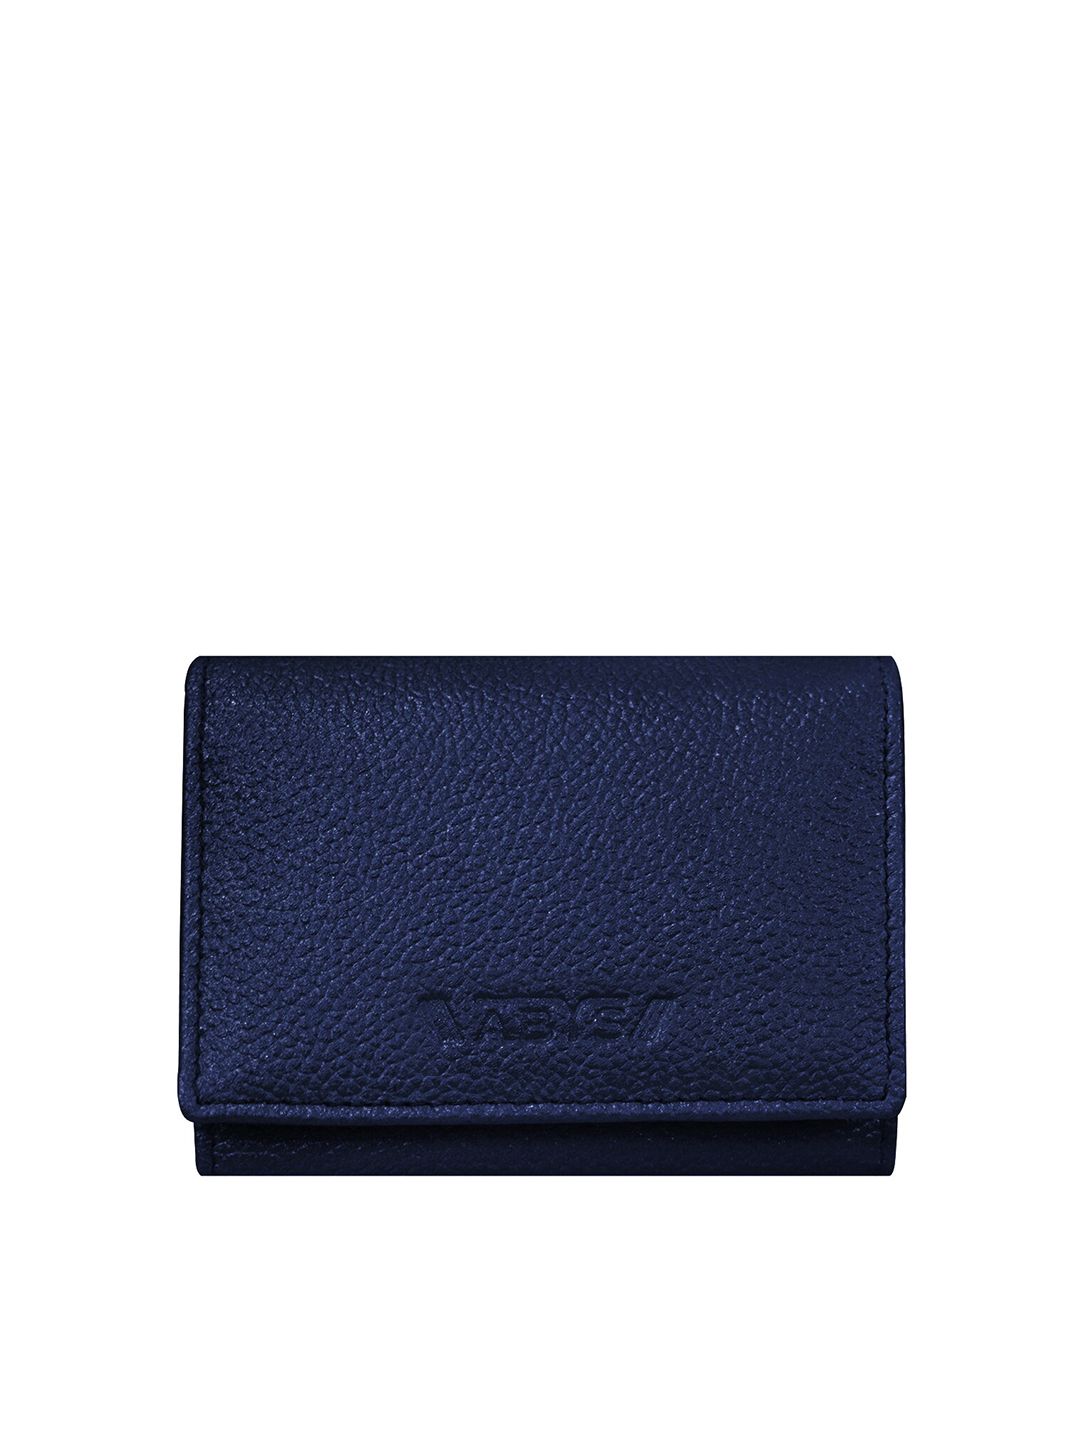 ABYS Unisex Navy Blue Textured Leather Card Holder Price in India